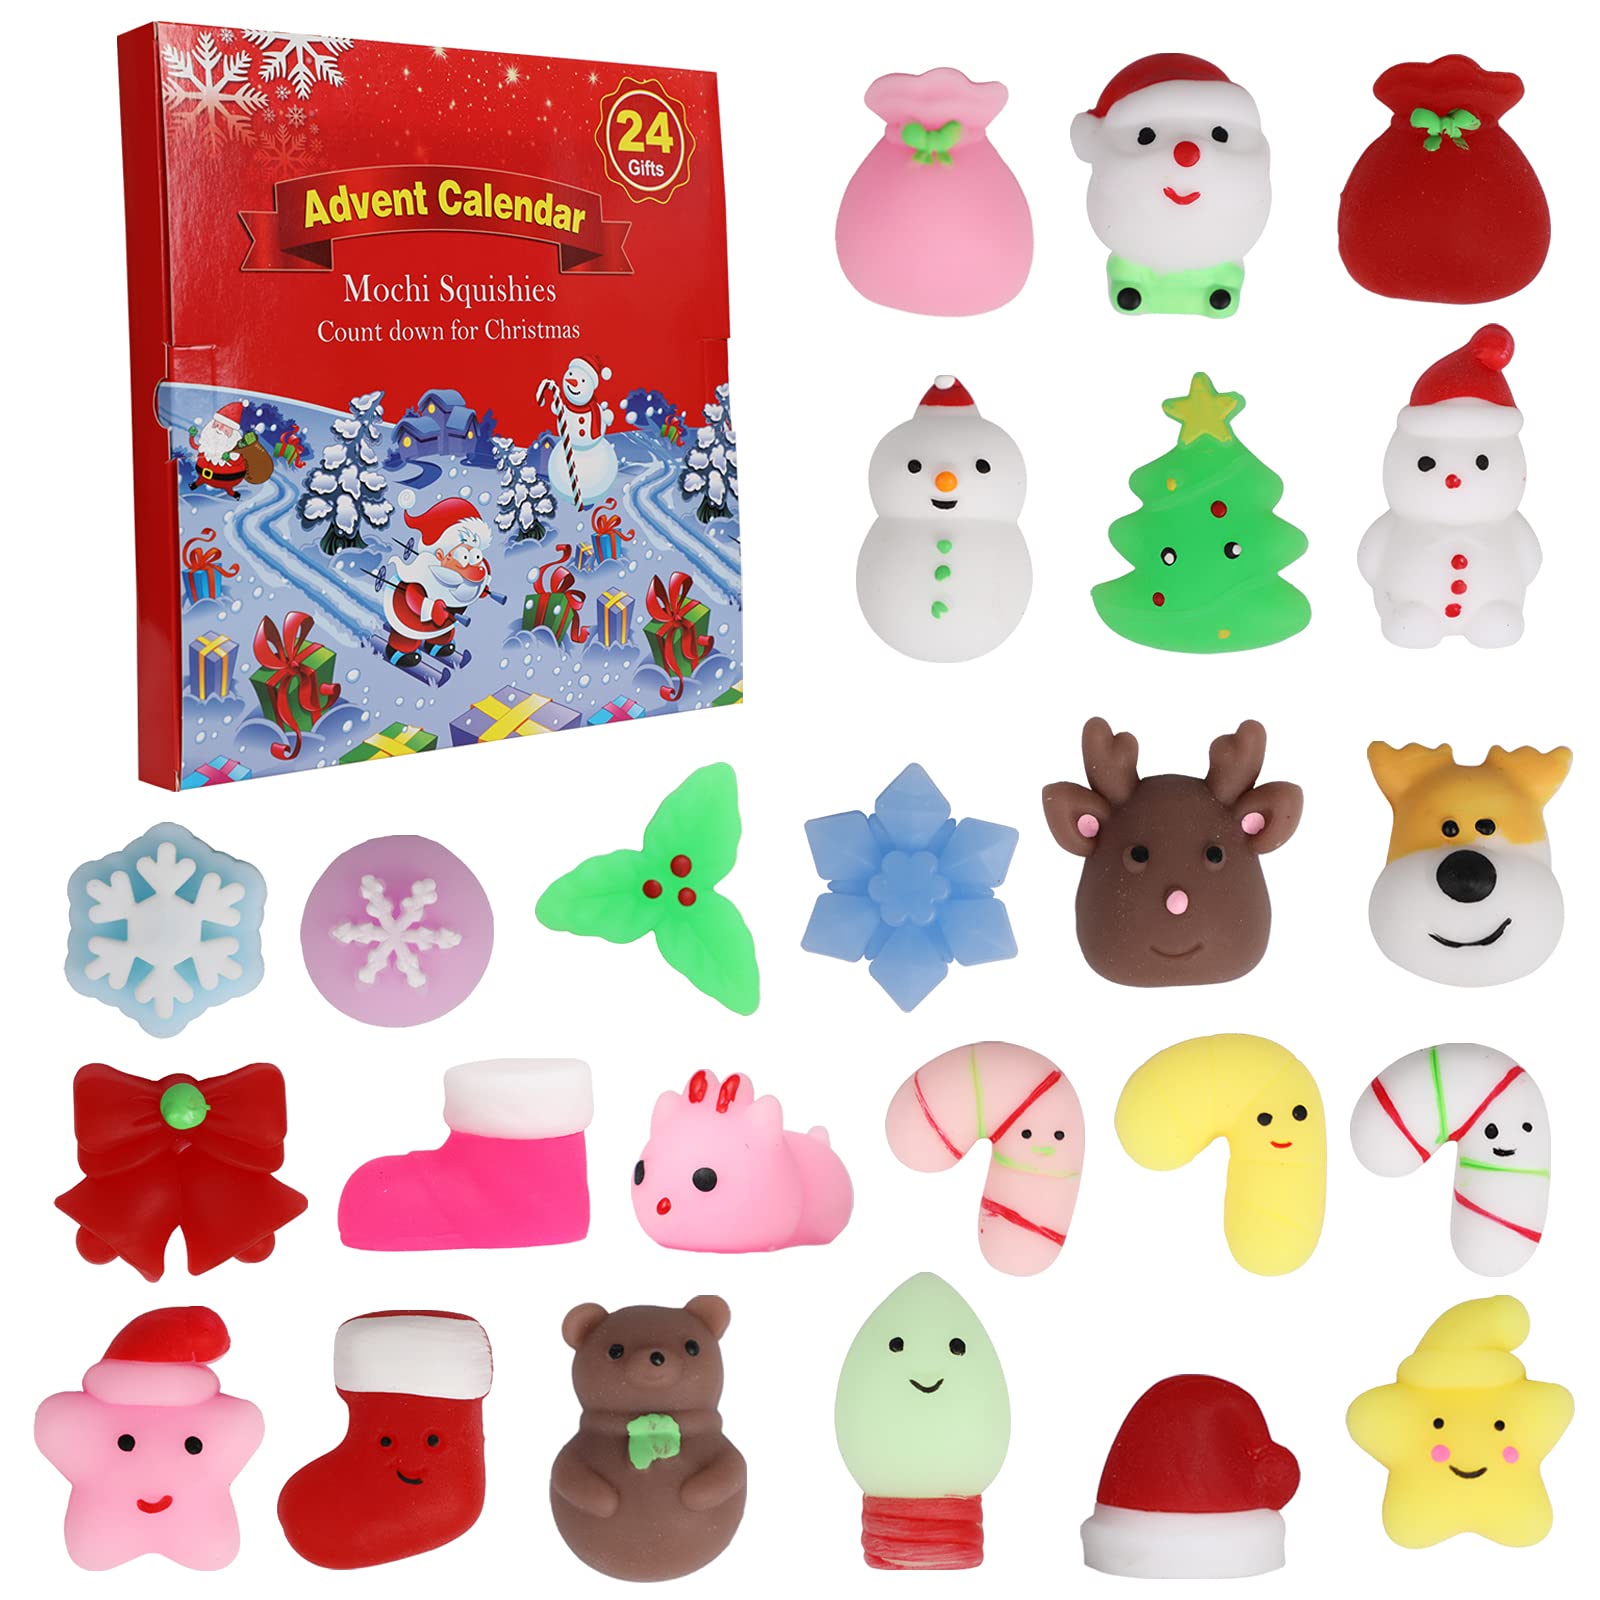 Christmas Advent Calendar 2021 for Kids, 24 pcs Squishy Fidget Toys Advent Calendar for Christmas Countdown Xmas Gift for Toddler Boys and Girls Birthday Holiday Party Christmas